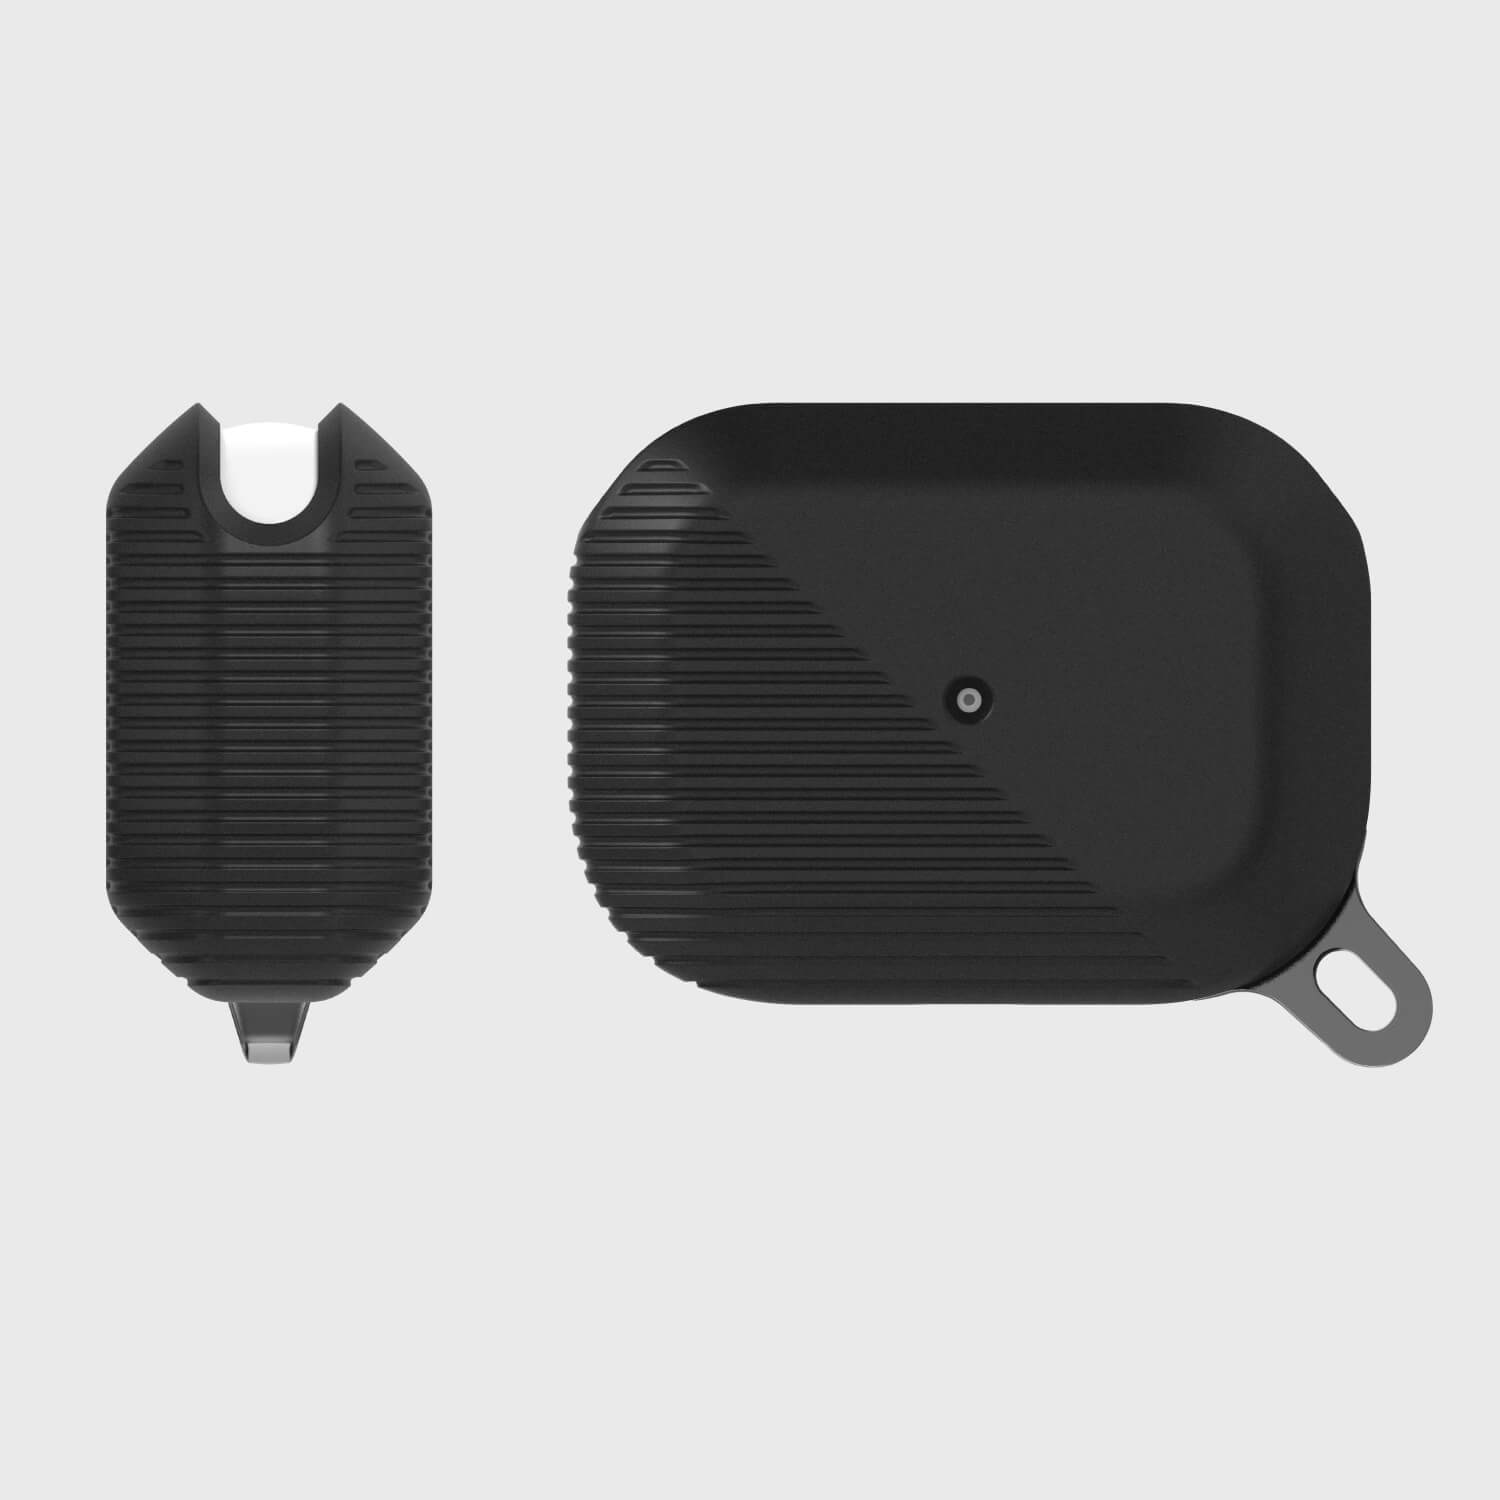 A Raptic Apple AirPods Pro Case - RADIUS with a black carabiner attached to it for added protection.